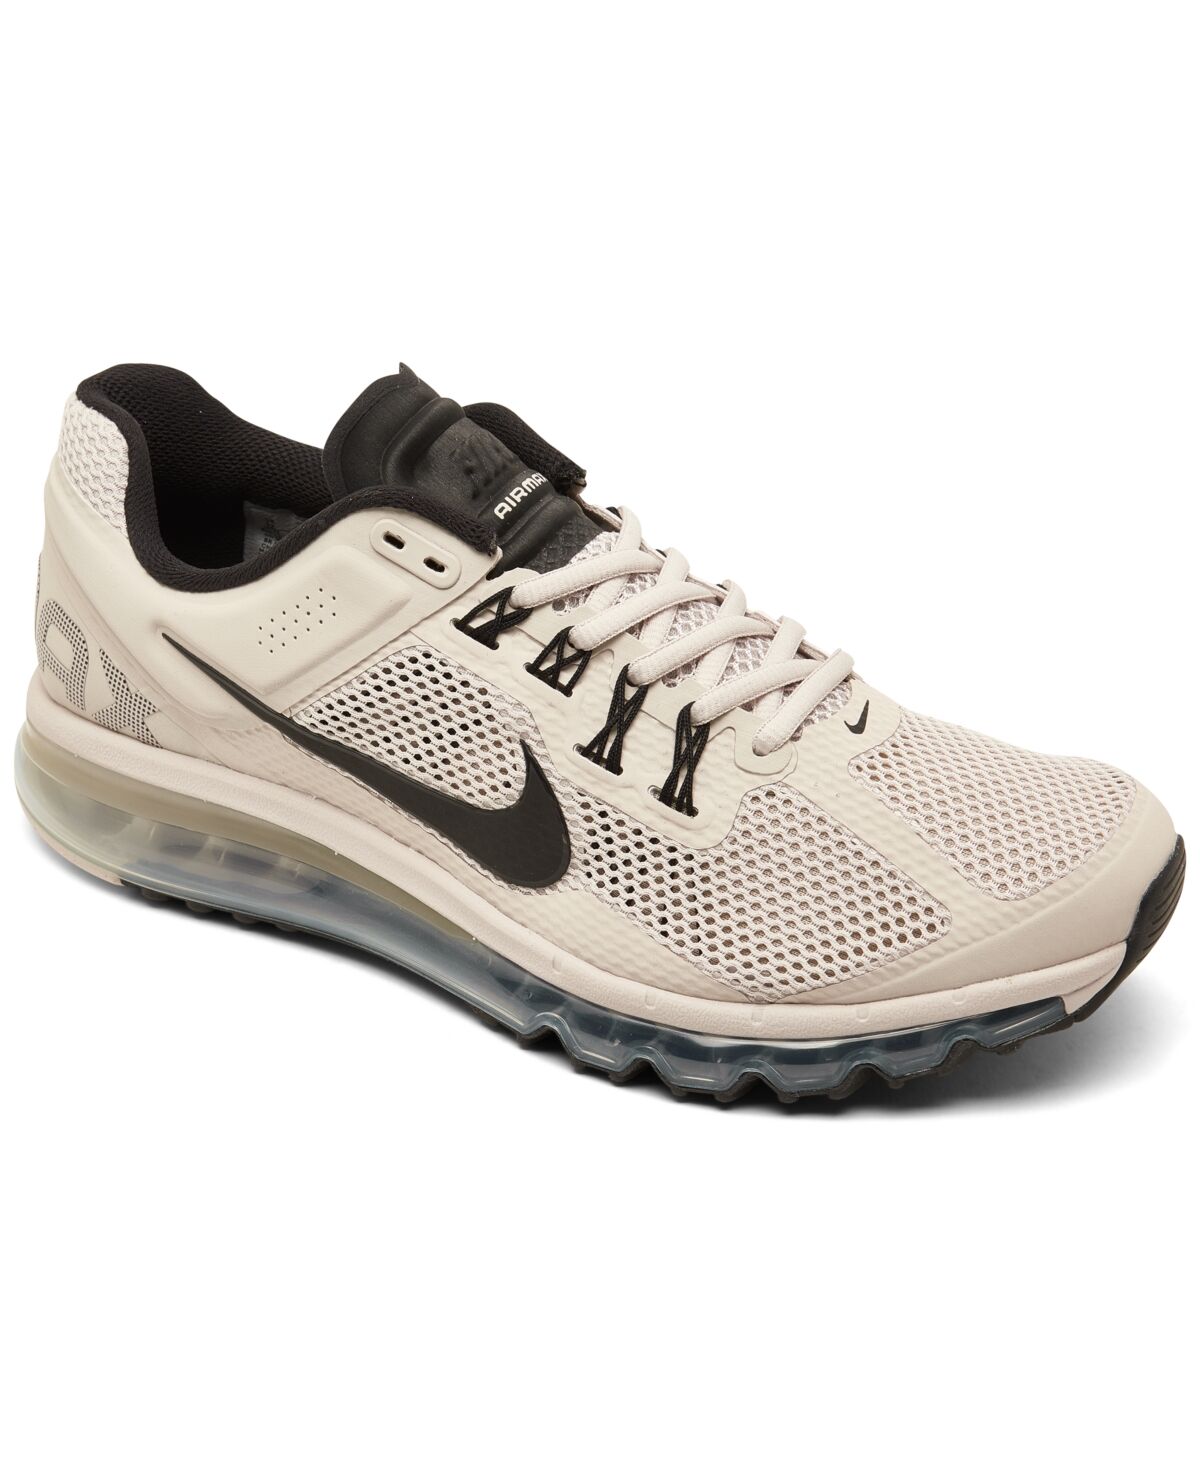 Nike Men's Air Max 2013 Casual Sneakers from Finish Line - Desert Sand, Black